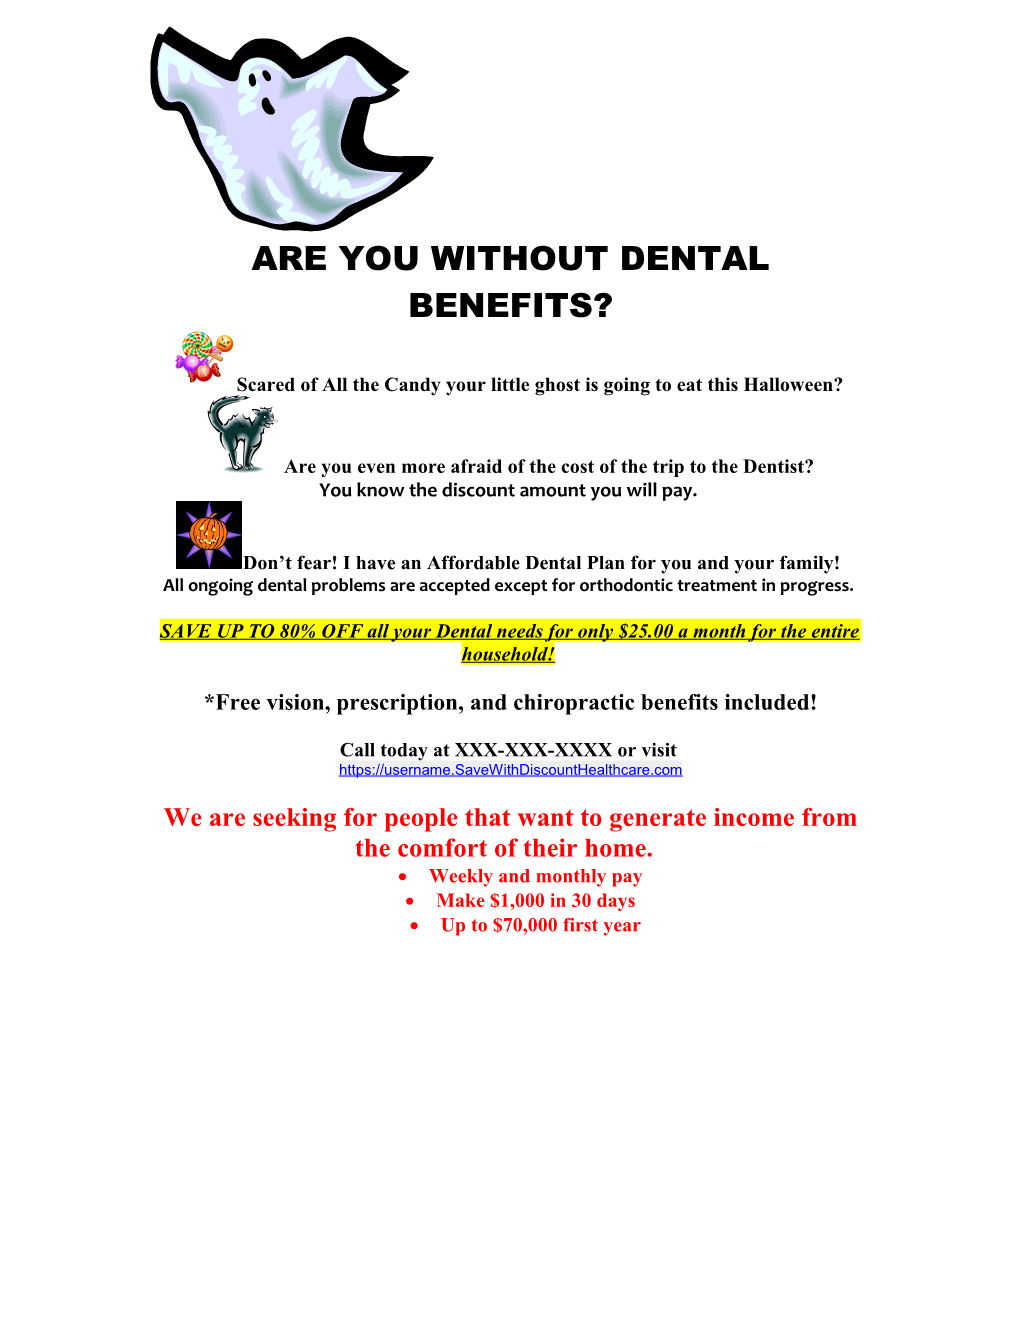 Are You Without Dental Benefits?